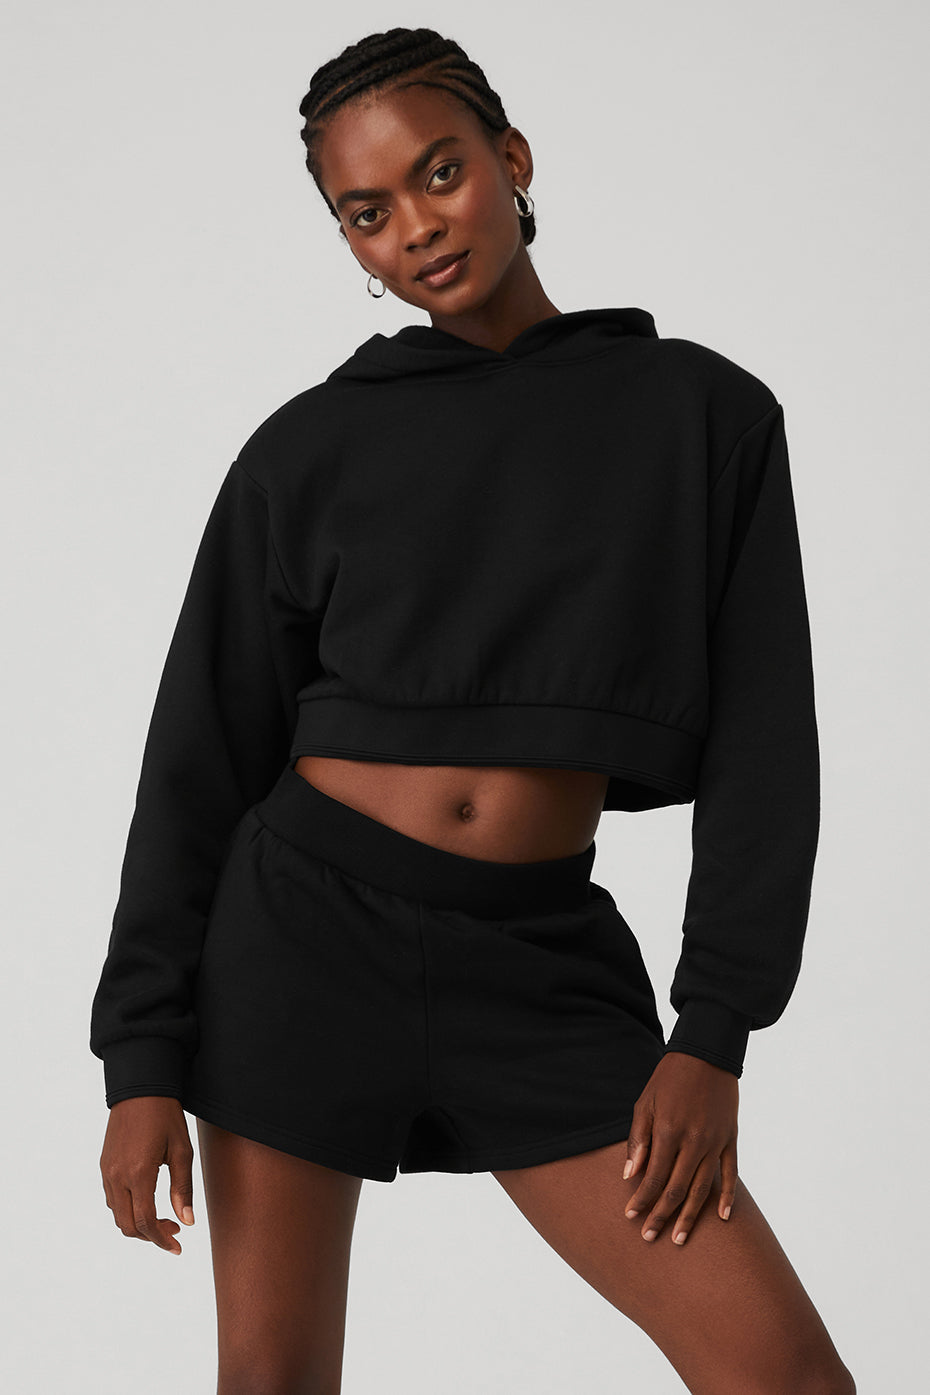 Accolade Hoodie in Black by Alo Yoga